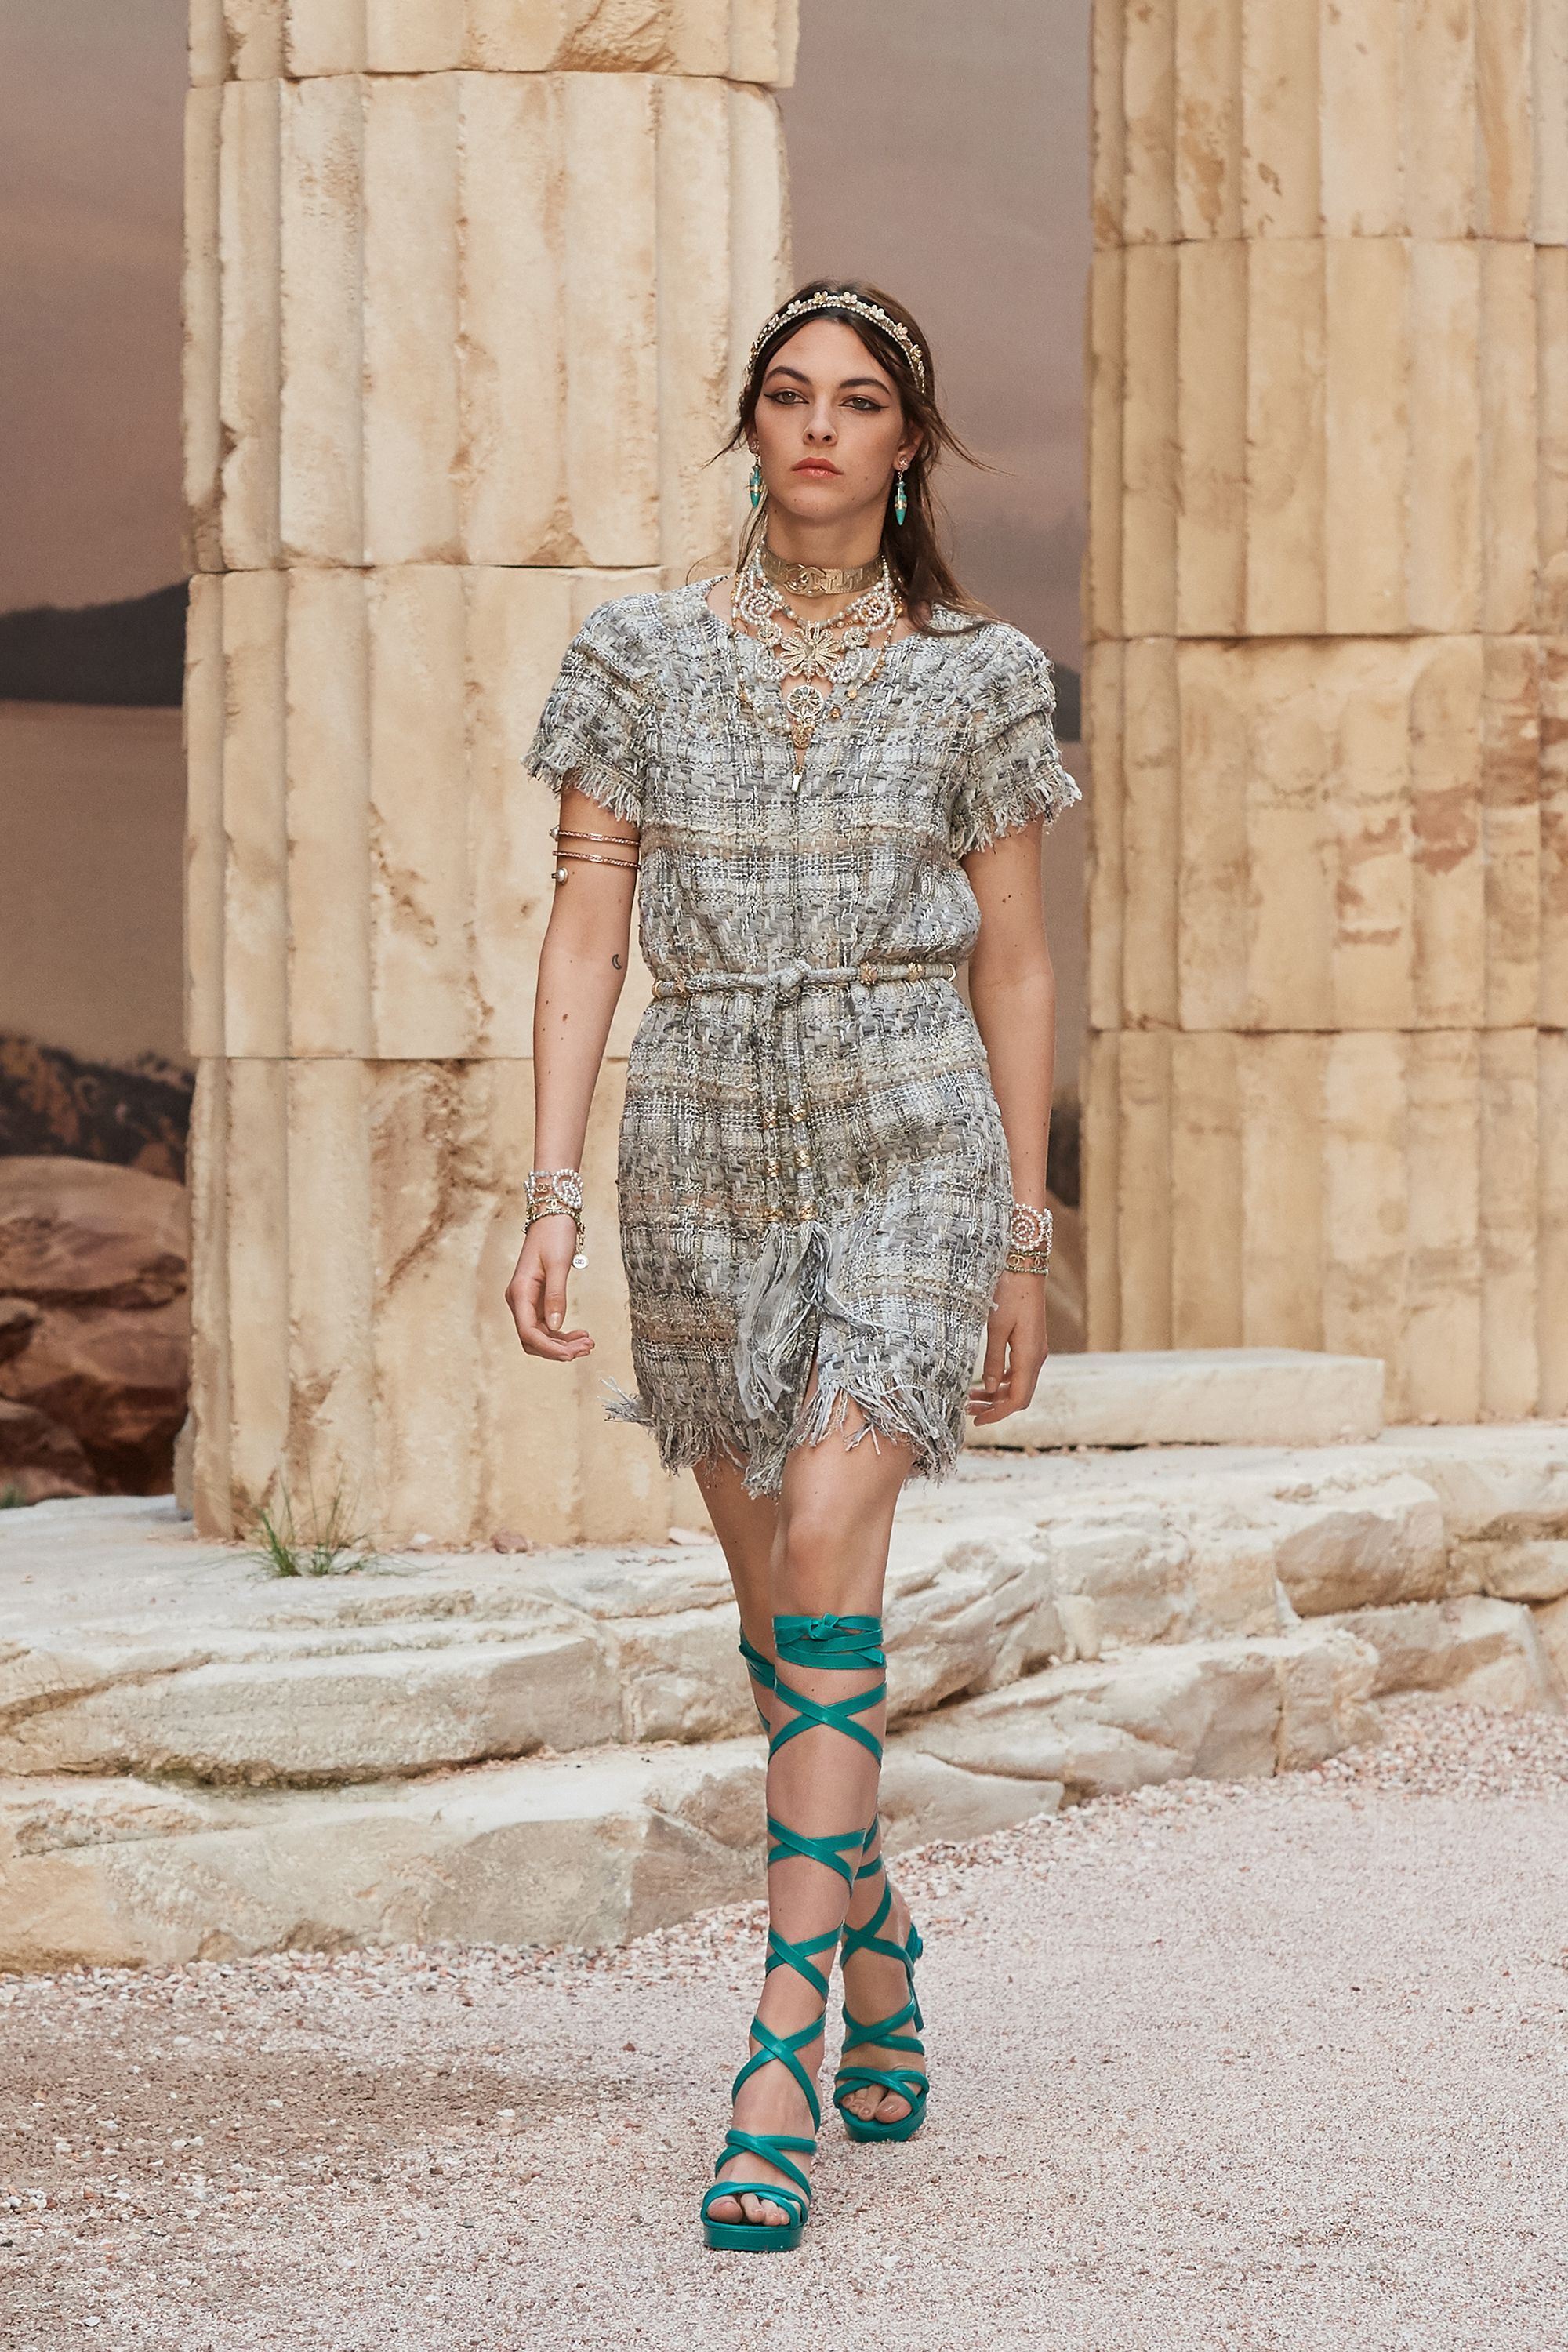 Chanel Cruise 2018 Collection - Chanel Cruise 2018 Ancient Greece